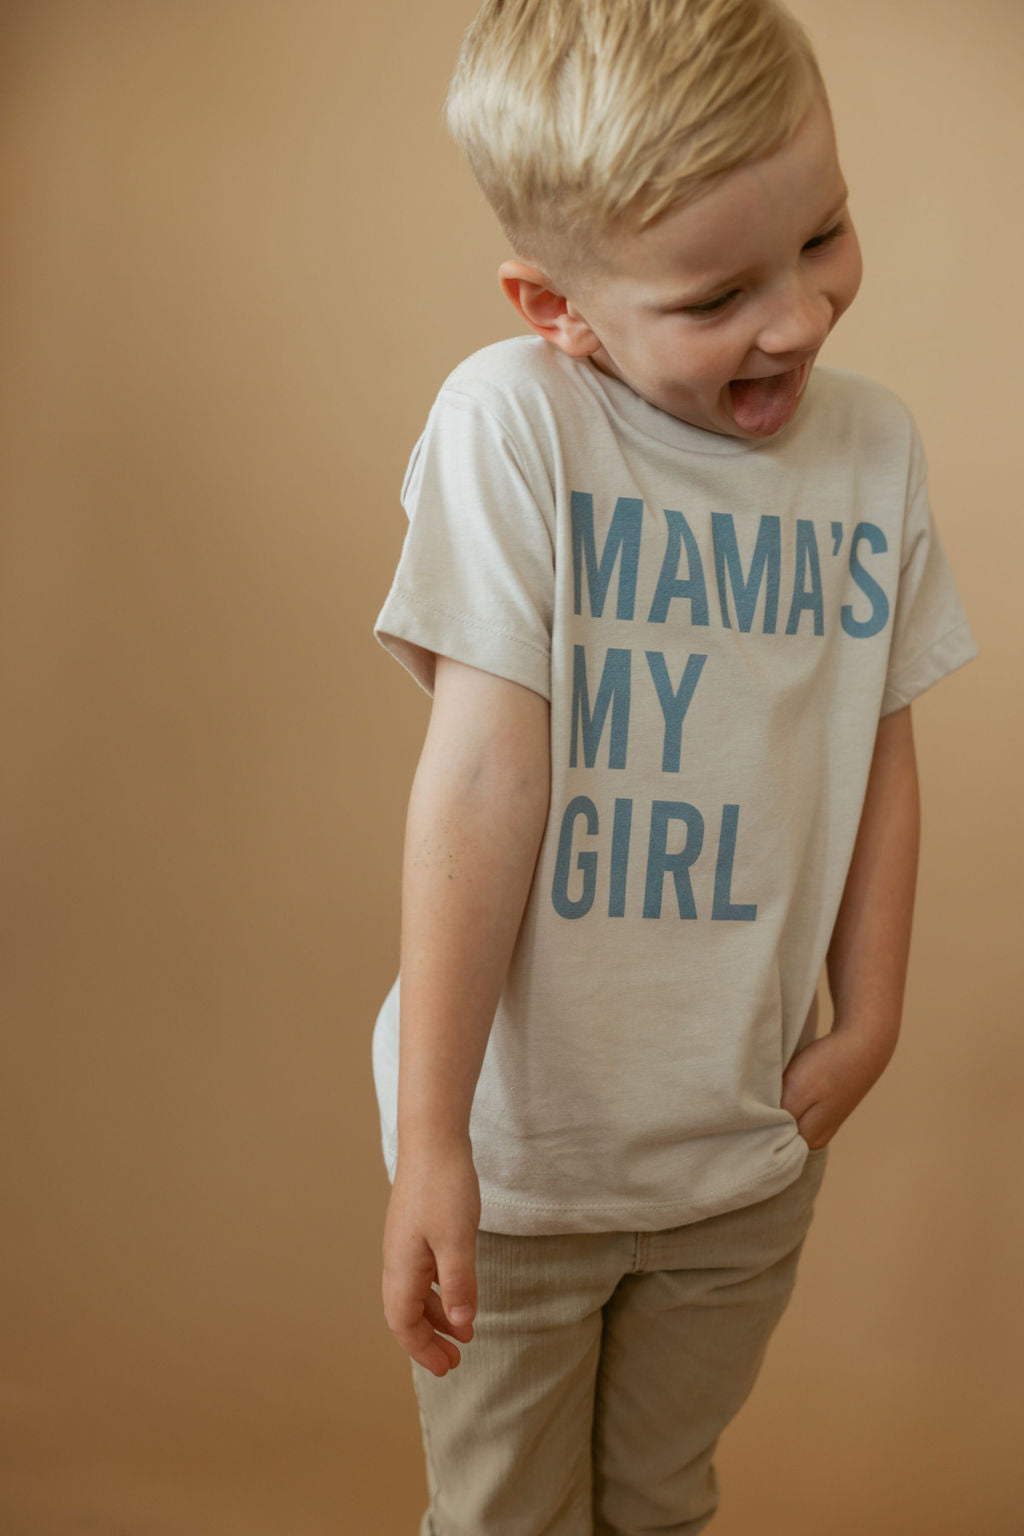 Mama's My Girl | Tee | Kids-Sister Shirts-Sister Shirts, Cute & Custom Tees for Mama & Littles in Trussville, Alabama.